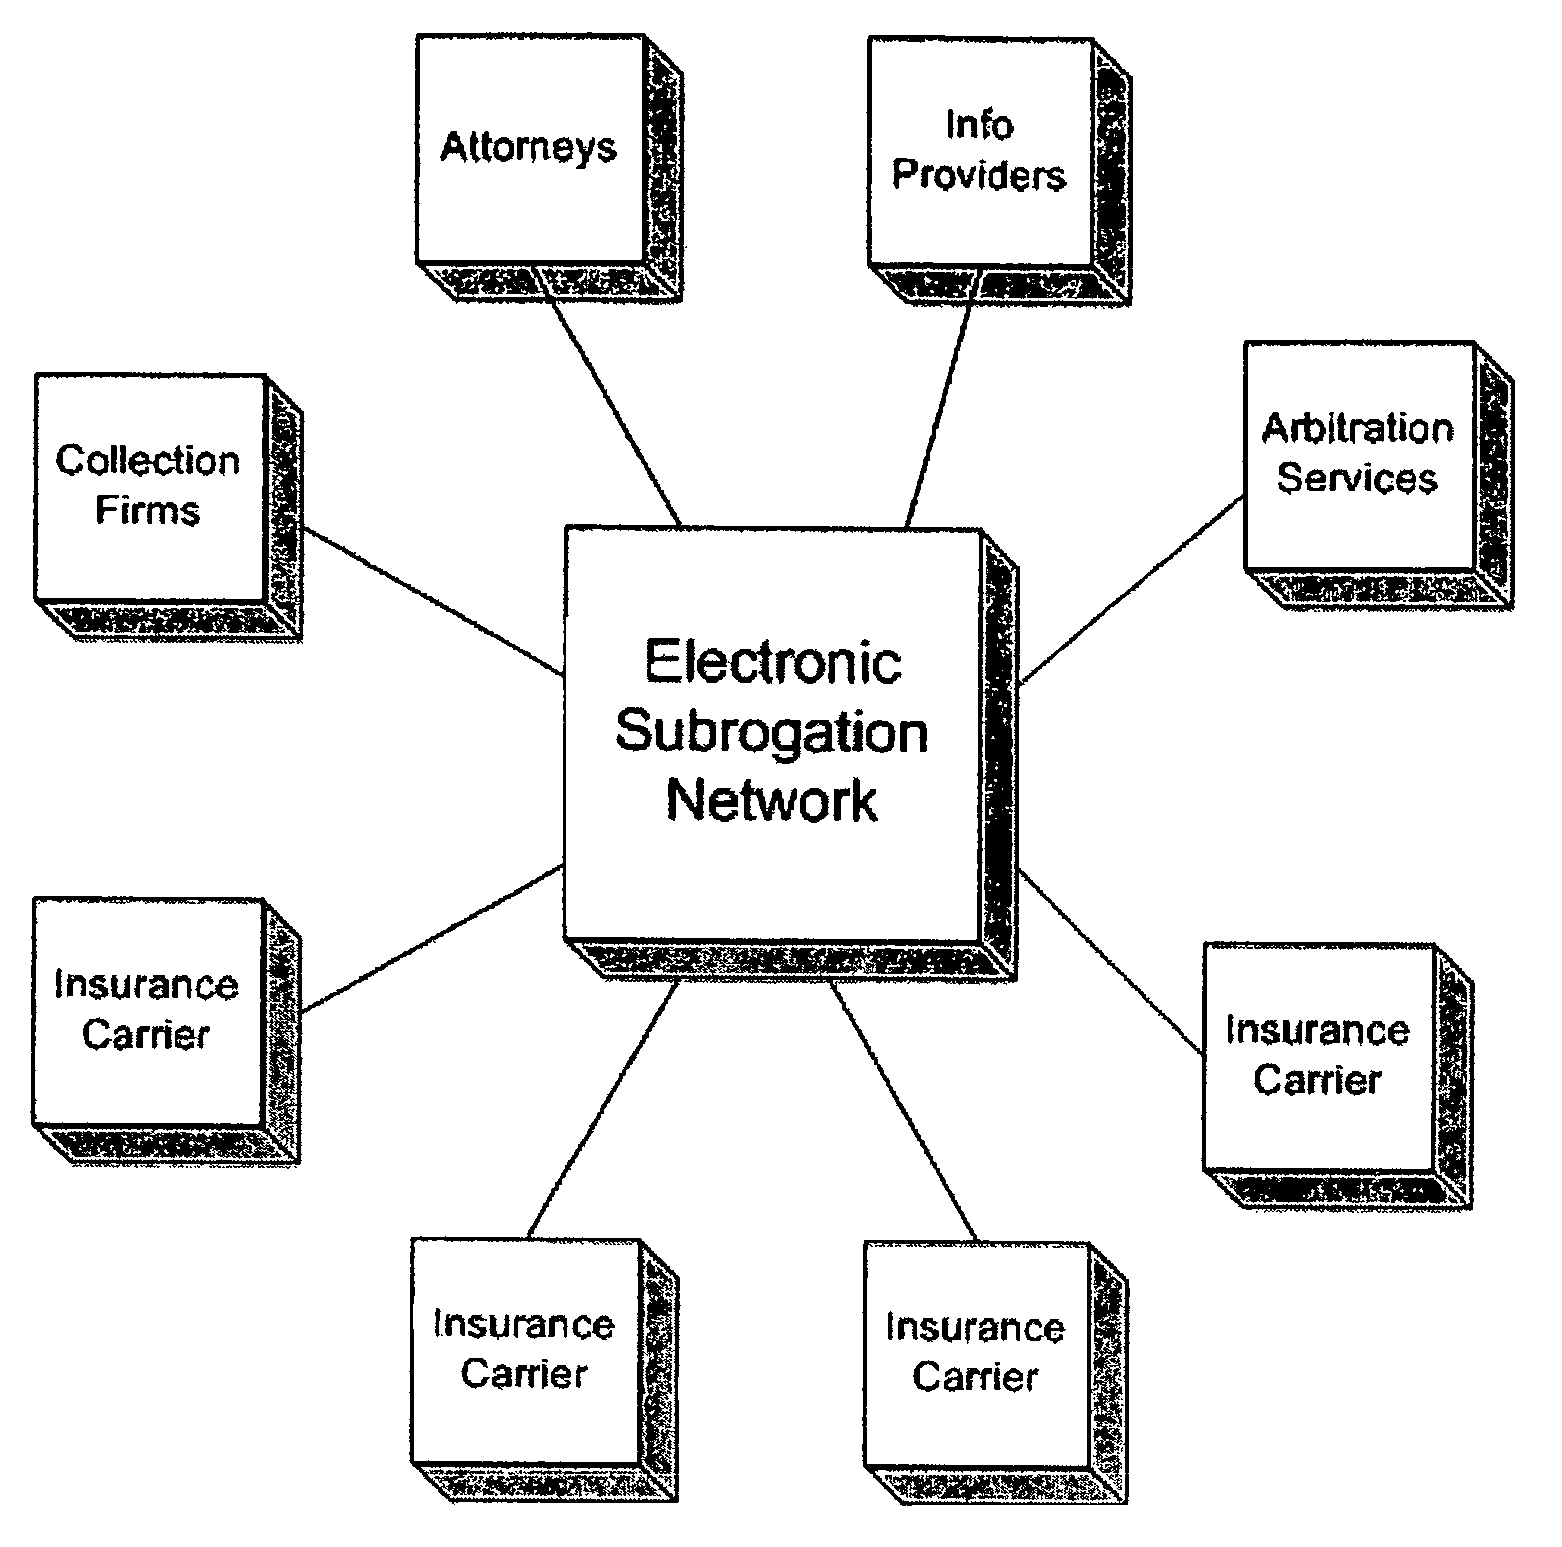 System and process for electronic subrogation, inter-organization workflow management, inter-organization transaction processing and optimized web-based user interaction